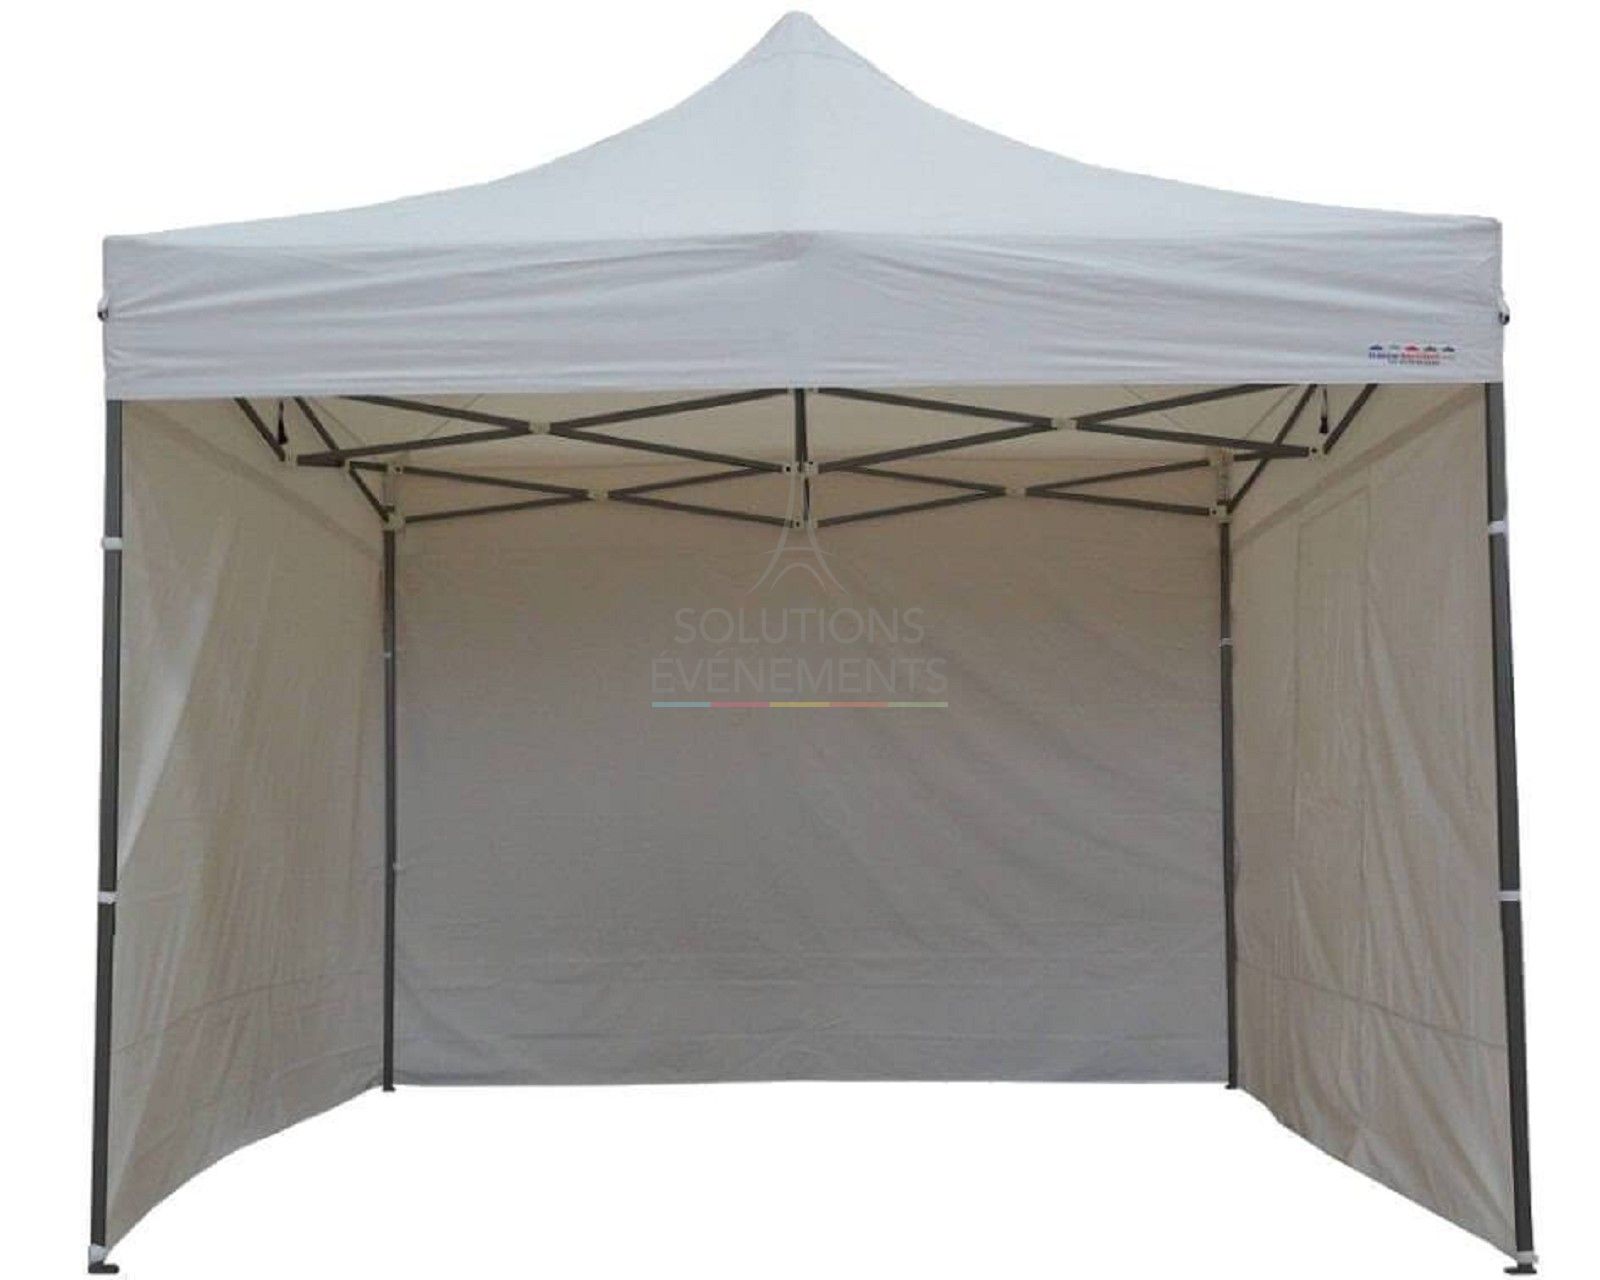 Marquee rental, Barnum, foldable tent for your outdoor events.